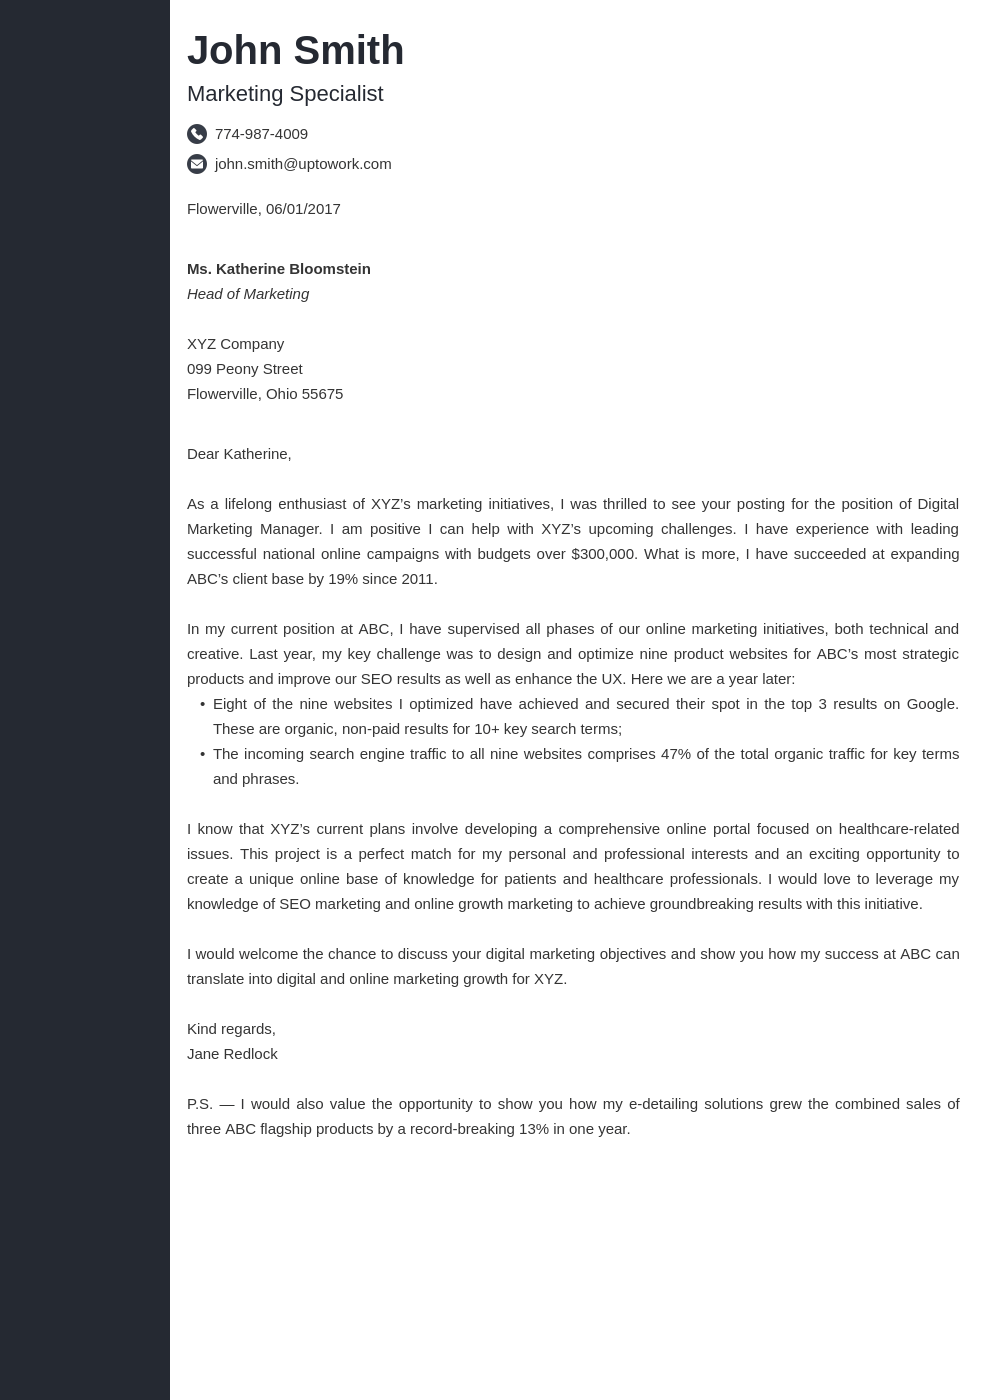 Professional Cover Letter For Job from cdn-images.zety.com